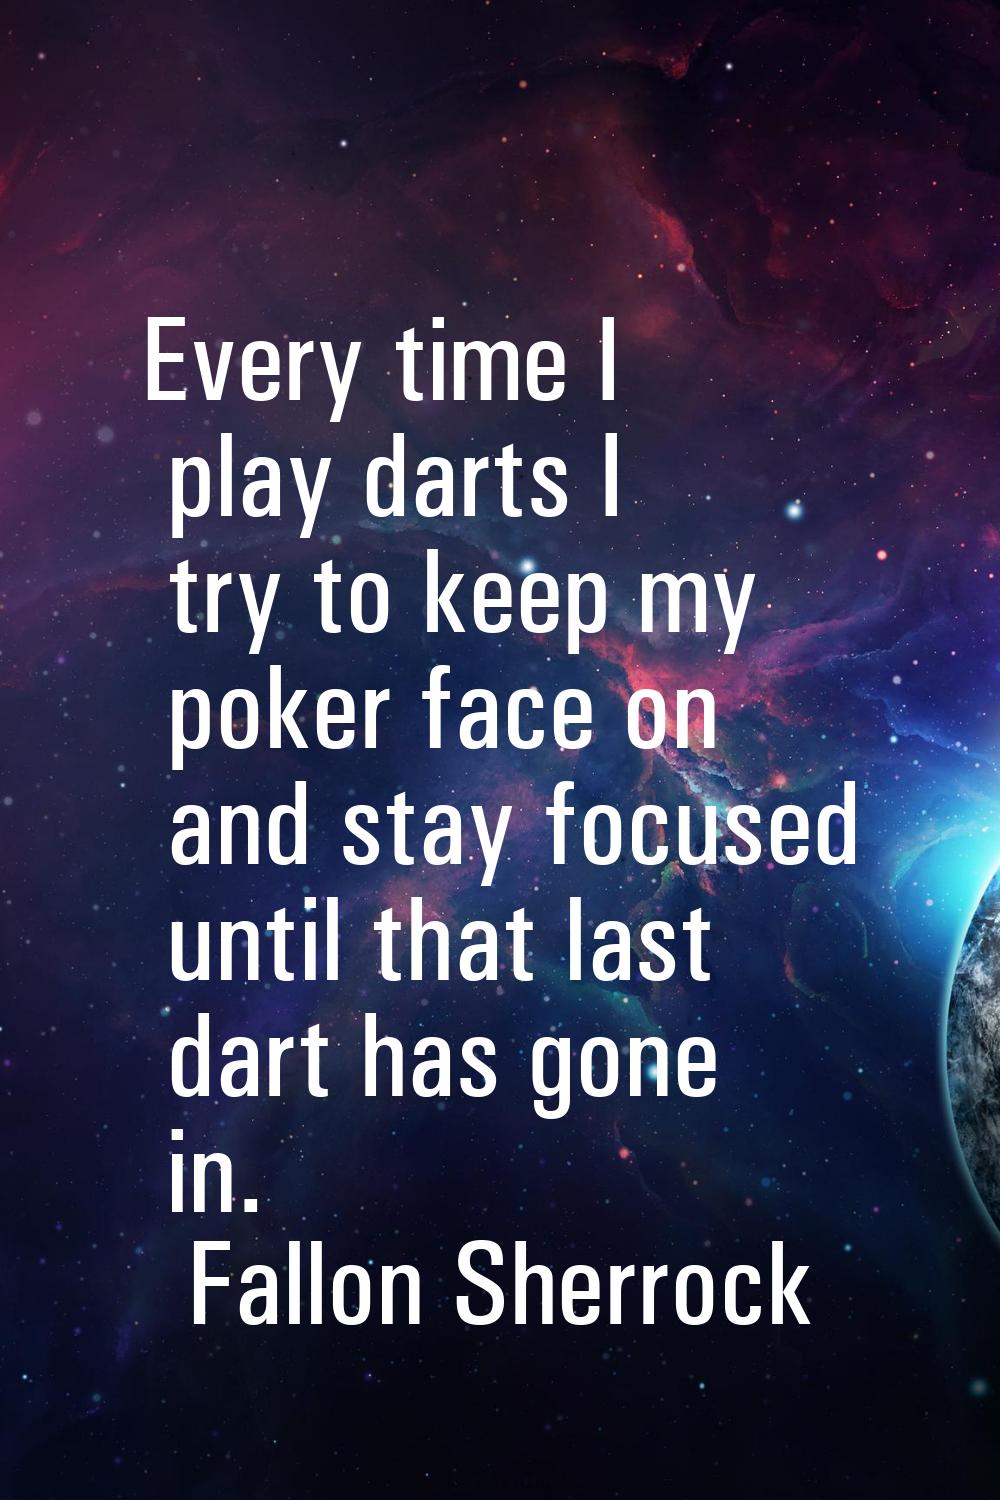 Every time I play darts I try to keep my poker face on and stay focused until that last dart has go